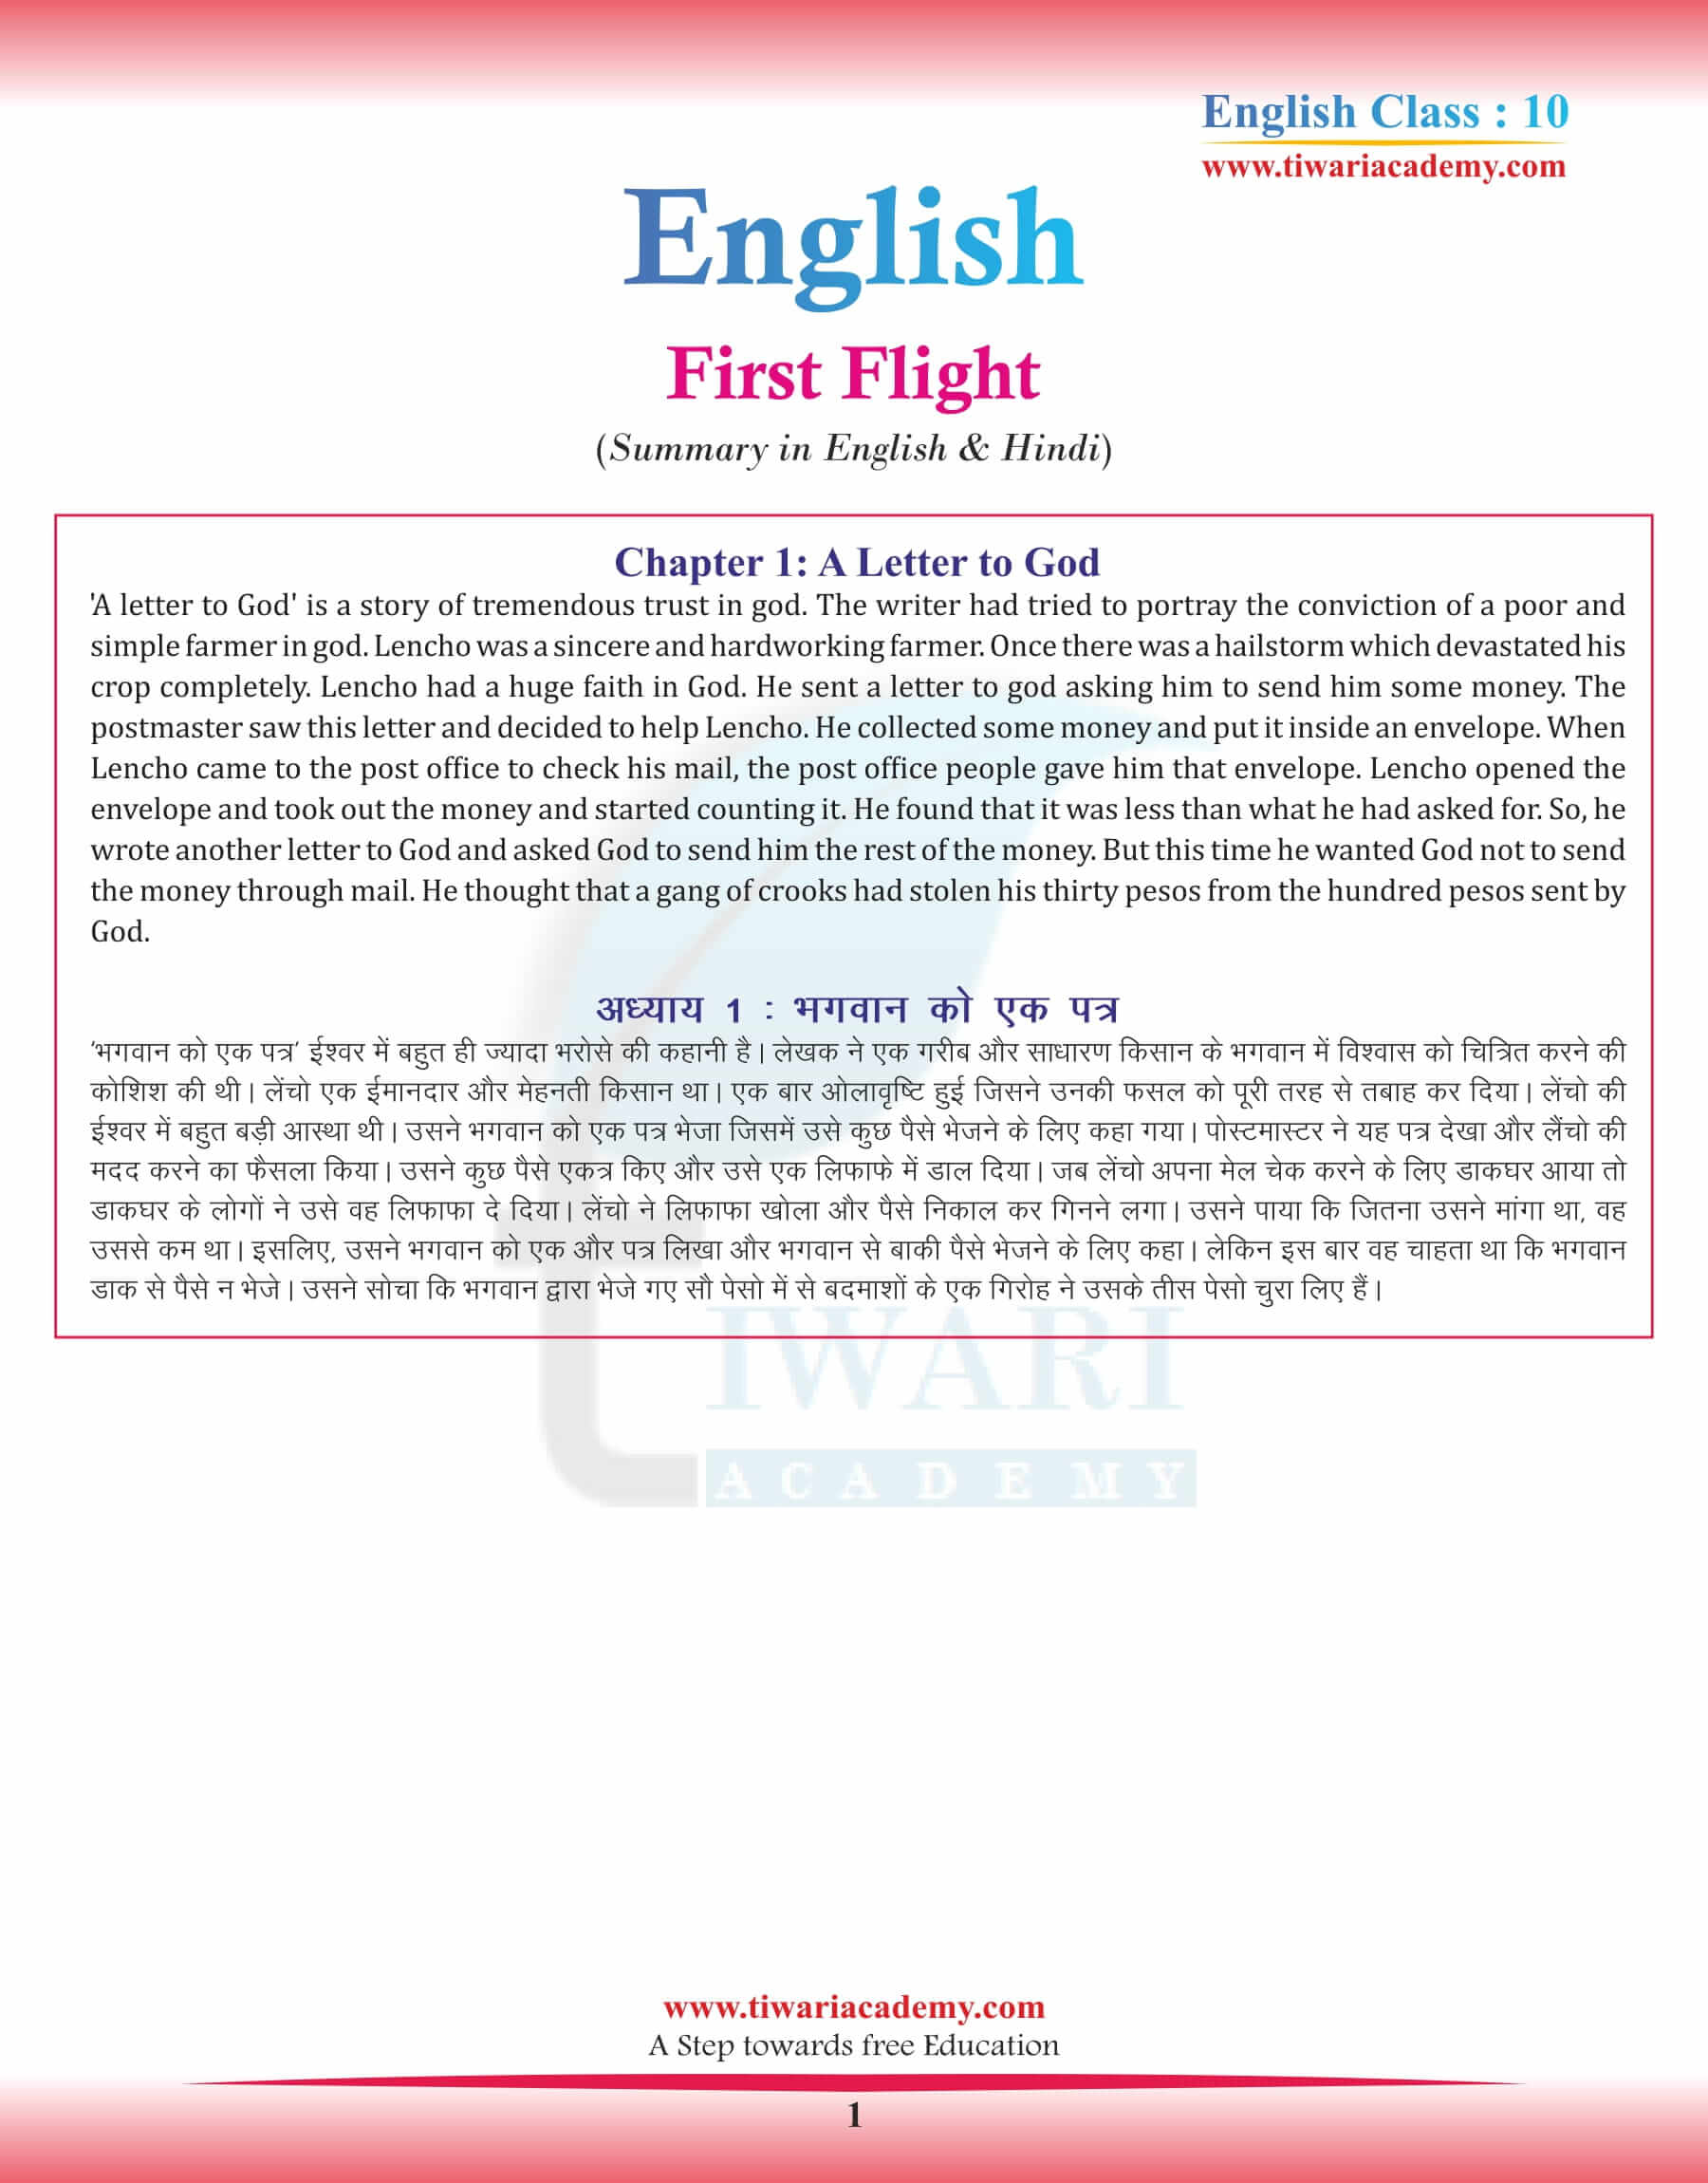 ncert-solutions-for-class-10-english-first-flight-chapter-1